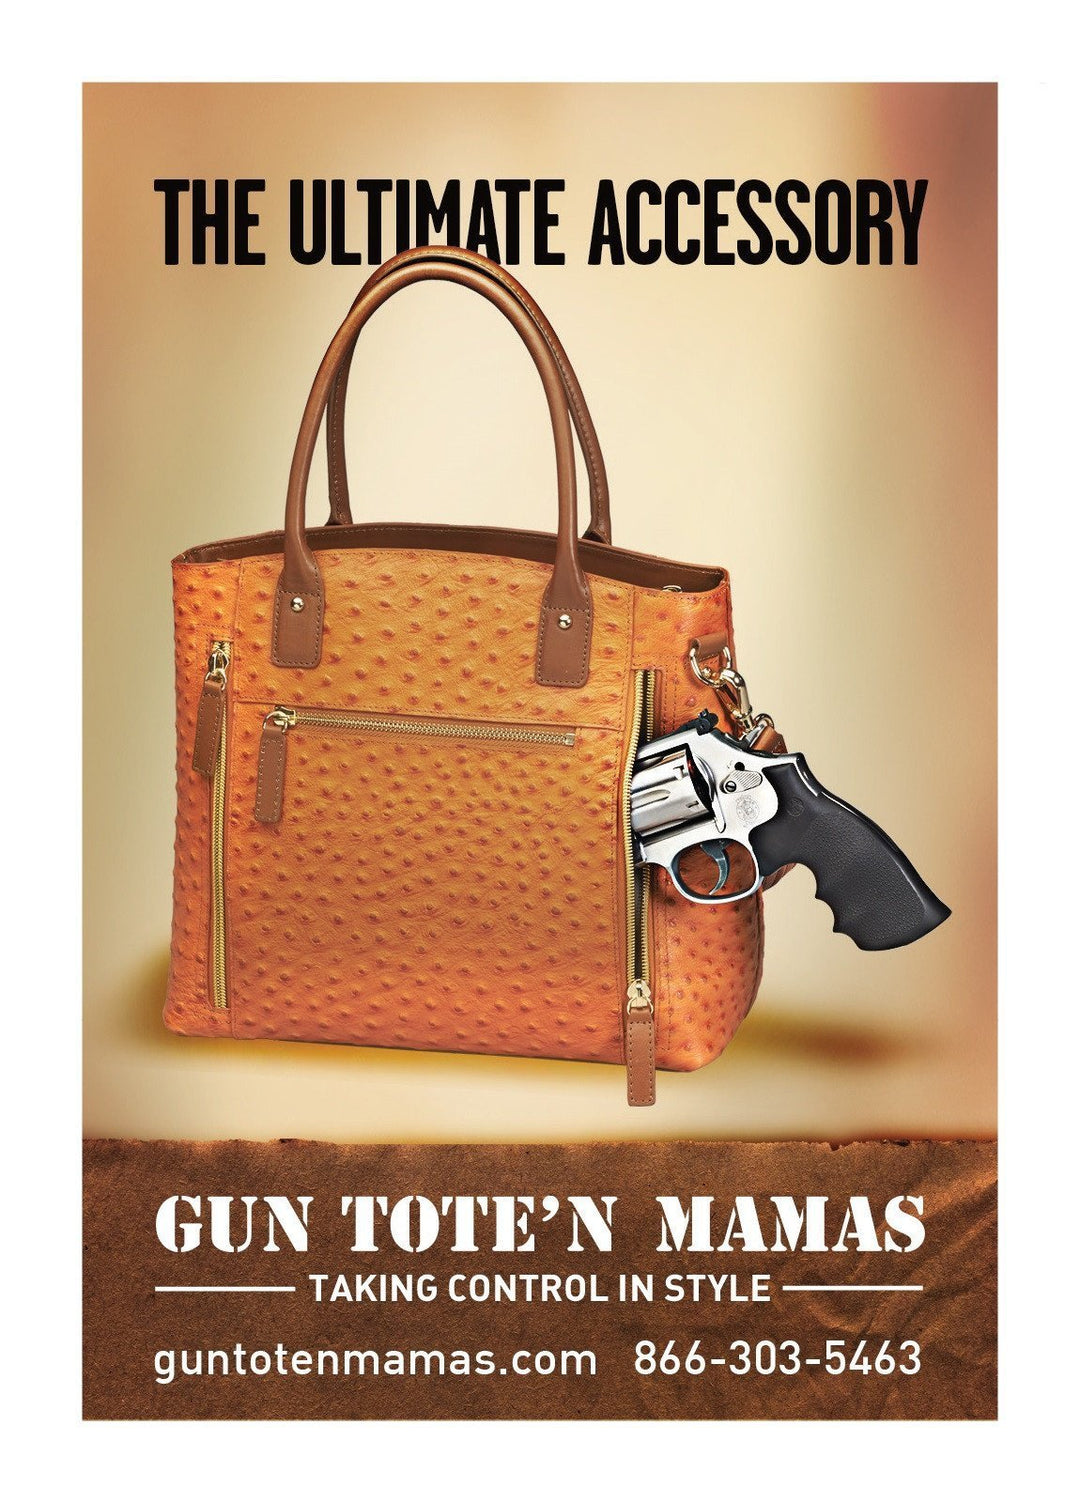 The Ultimate Accessory! The GTM-51 Town Tote